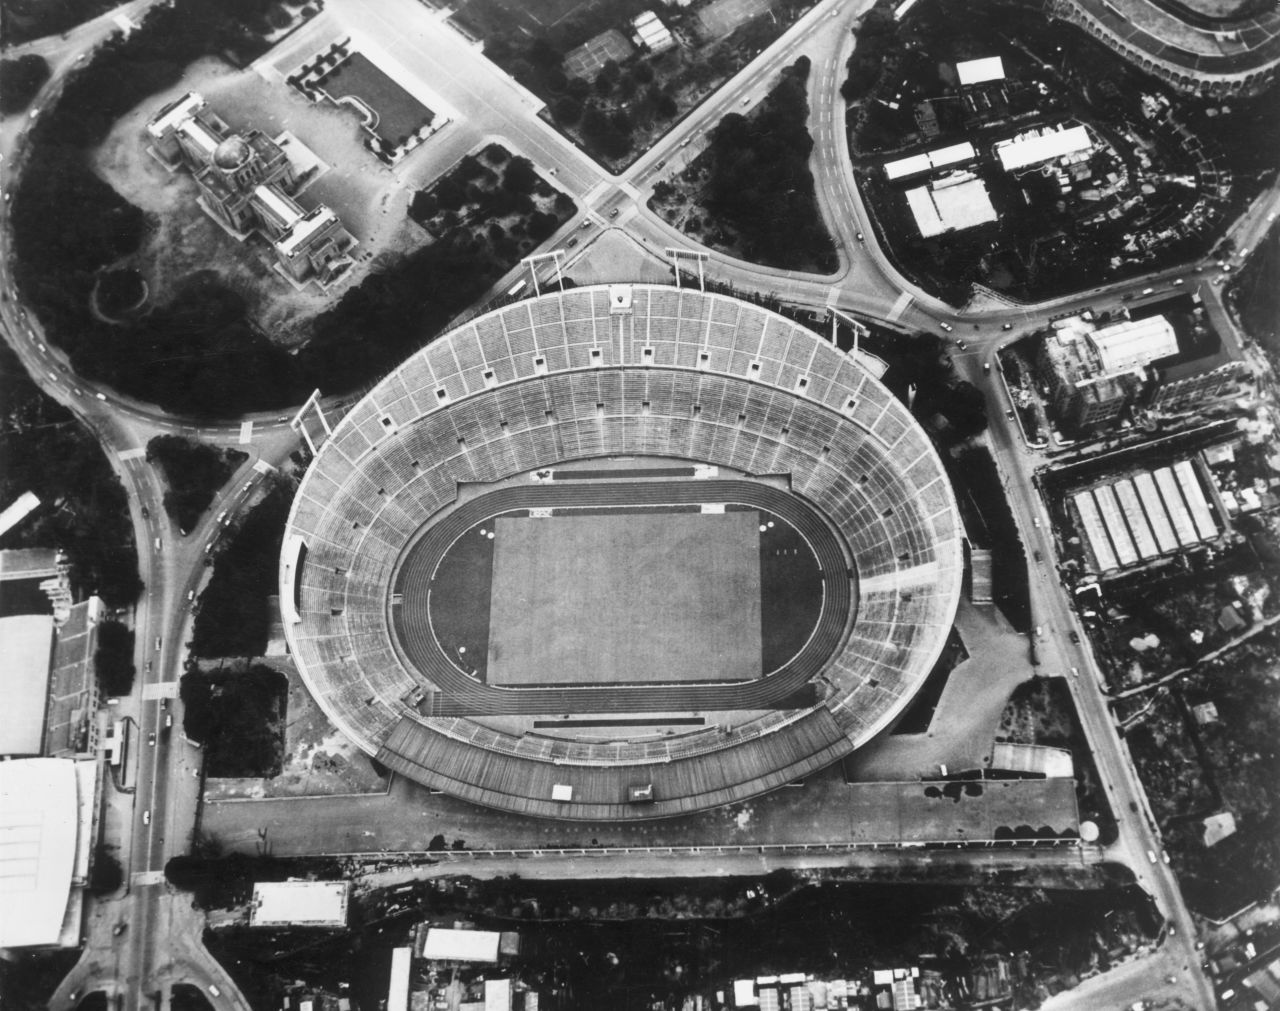 The National Stadium in Meiji Park, Tokyo, pictured on April 23, 1964, where tens of thousands of spectators watched the opening and closing ceremonies. 